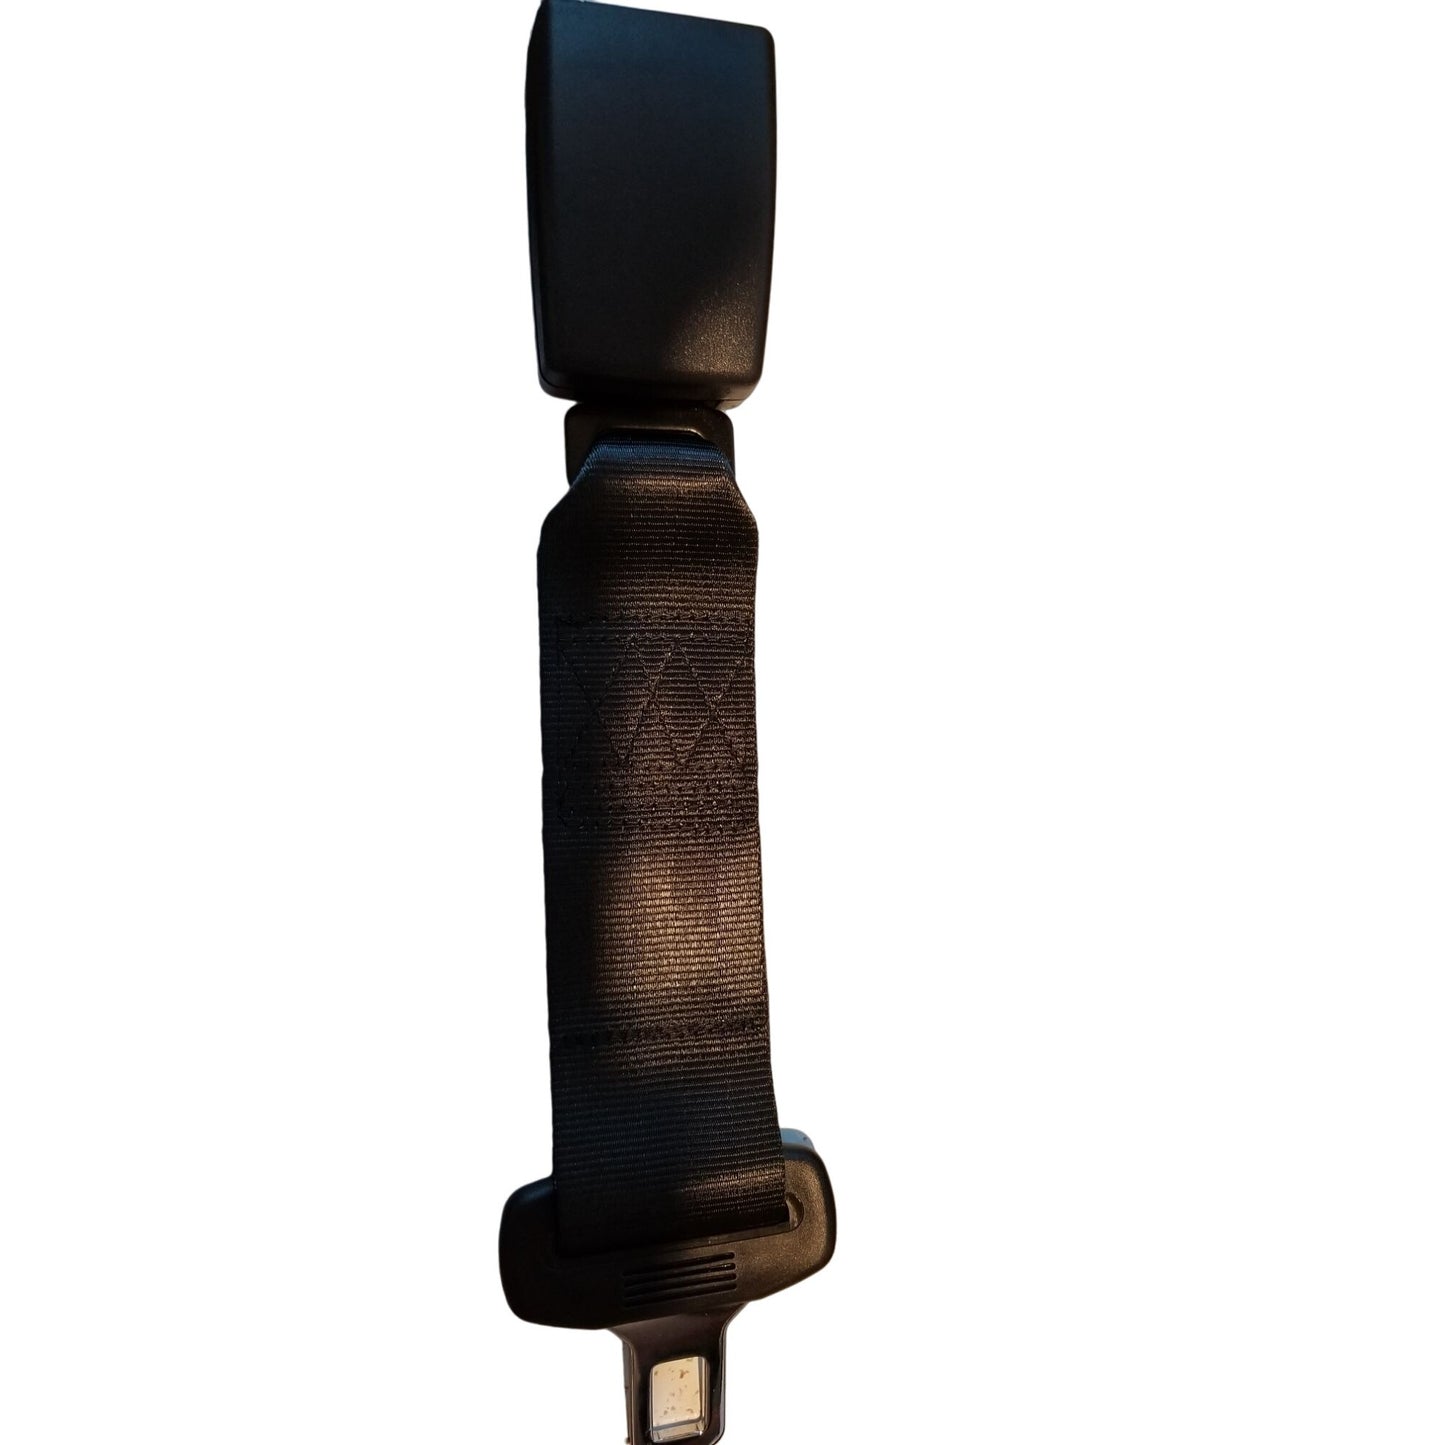 Universal Seat Belt Extender 12" Black with Red Button for release